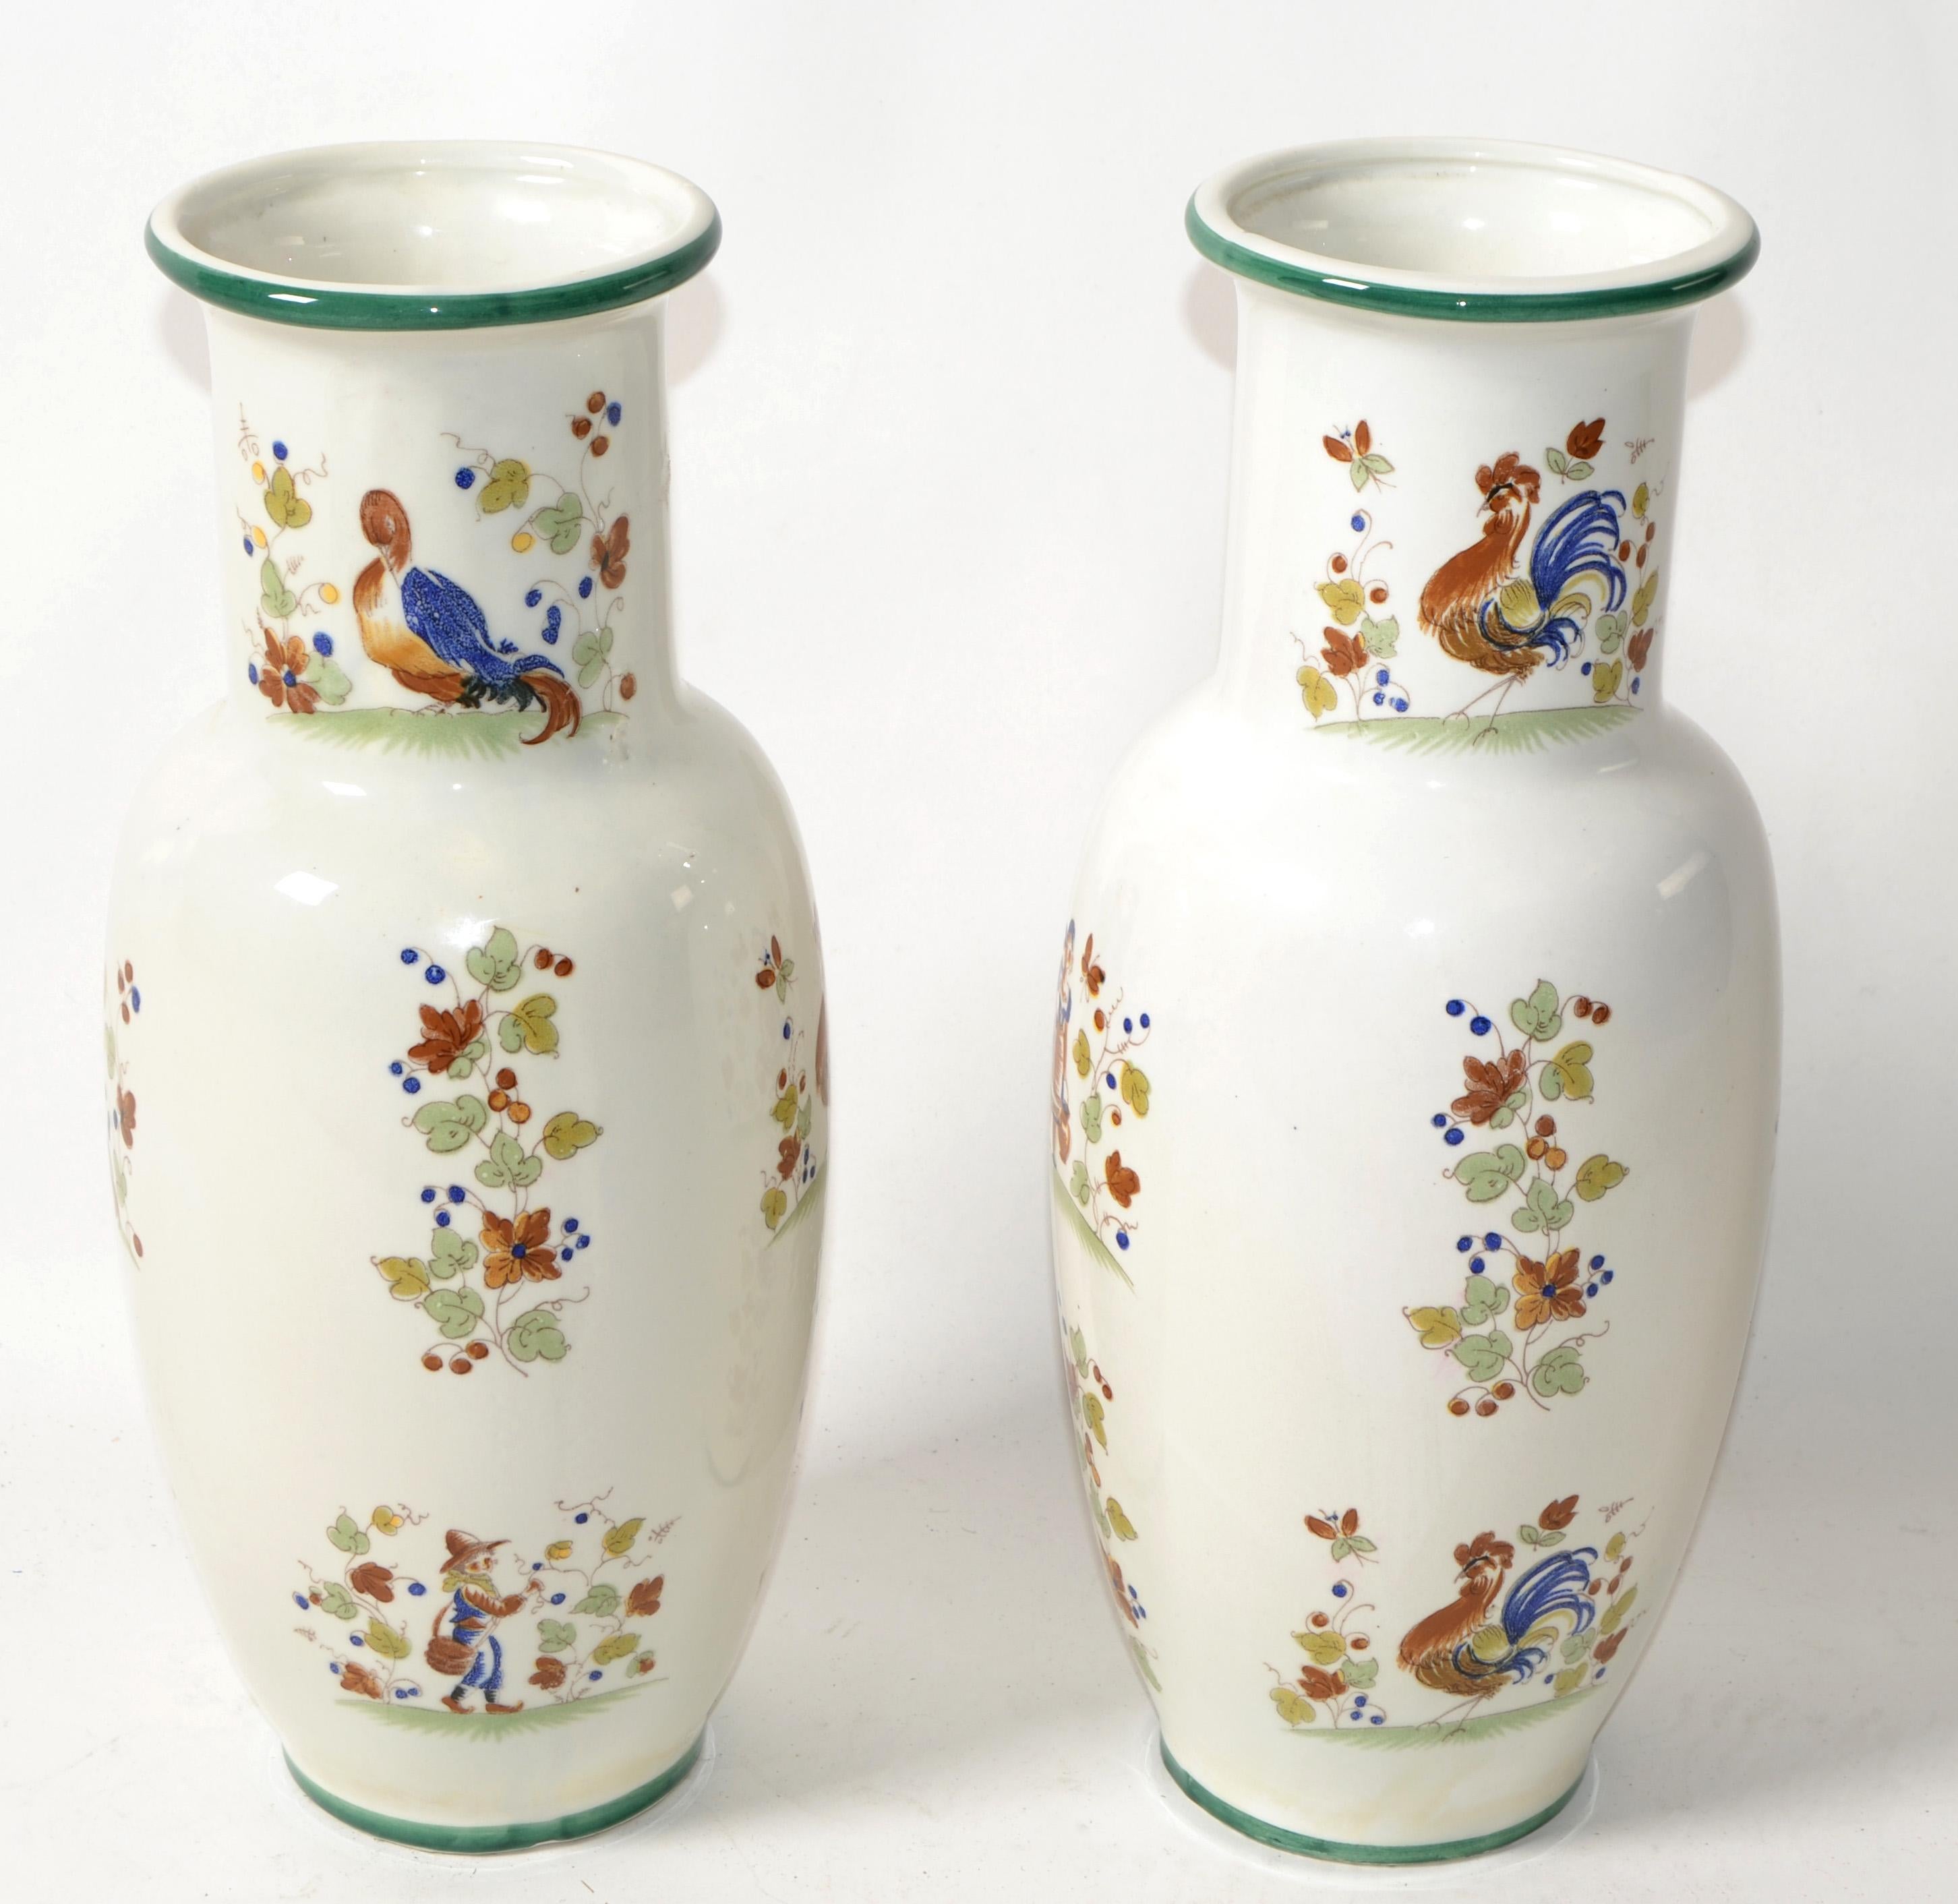 Charming Pair of Vintage Floral Vases in the Style of Deruta, hand-painted in Green, Beige and Blue Colors.
Depicting Leaves, Woman and Man as well as Birds all around. Hand-crafted and made out of glazed Ceramic.
Marked at the Base with gold foil